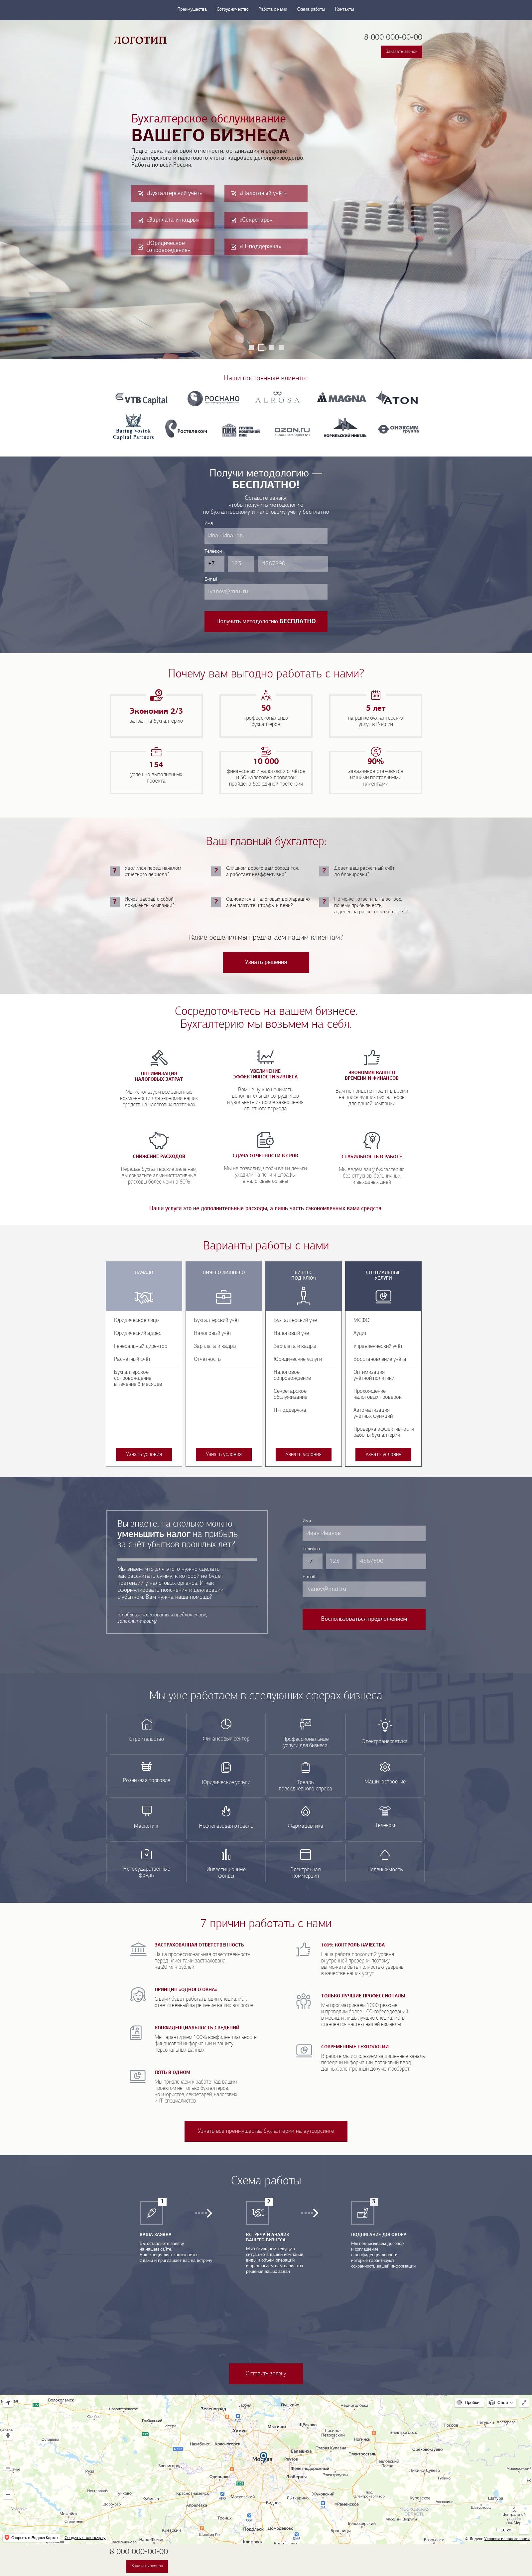 Landing page - Business accounting services